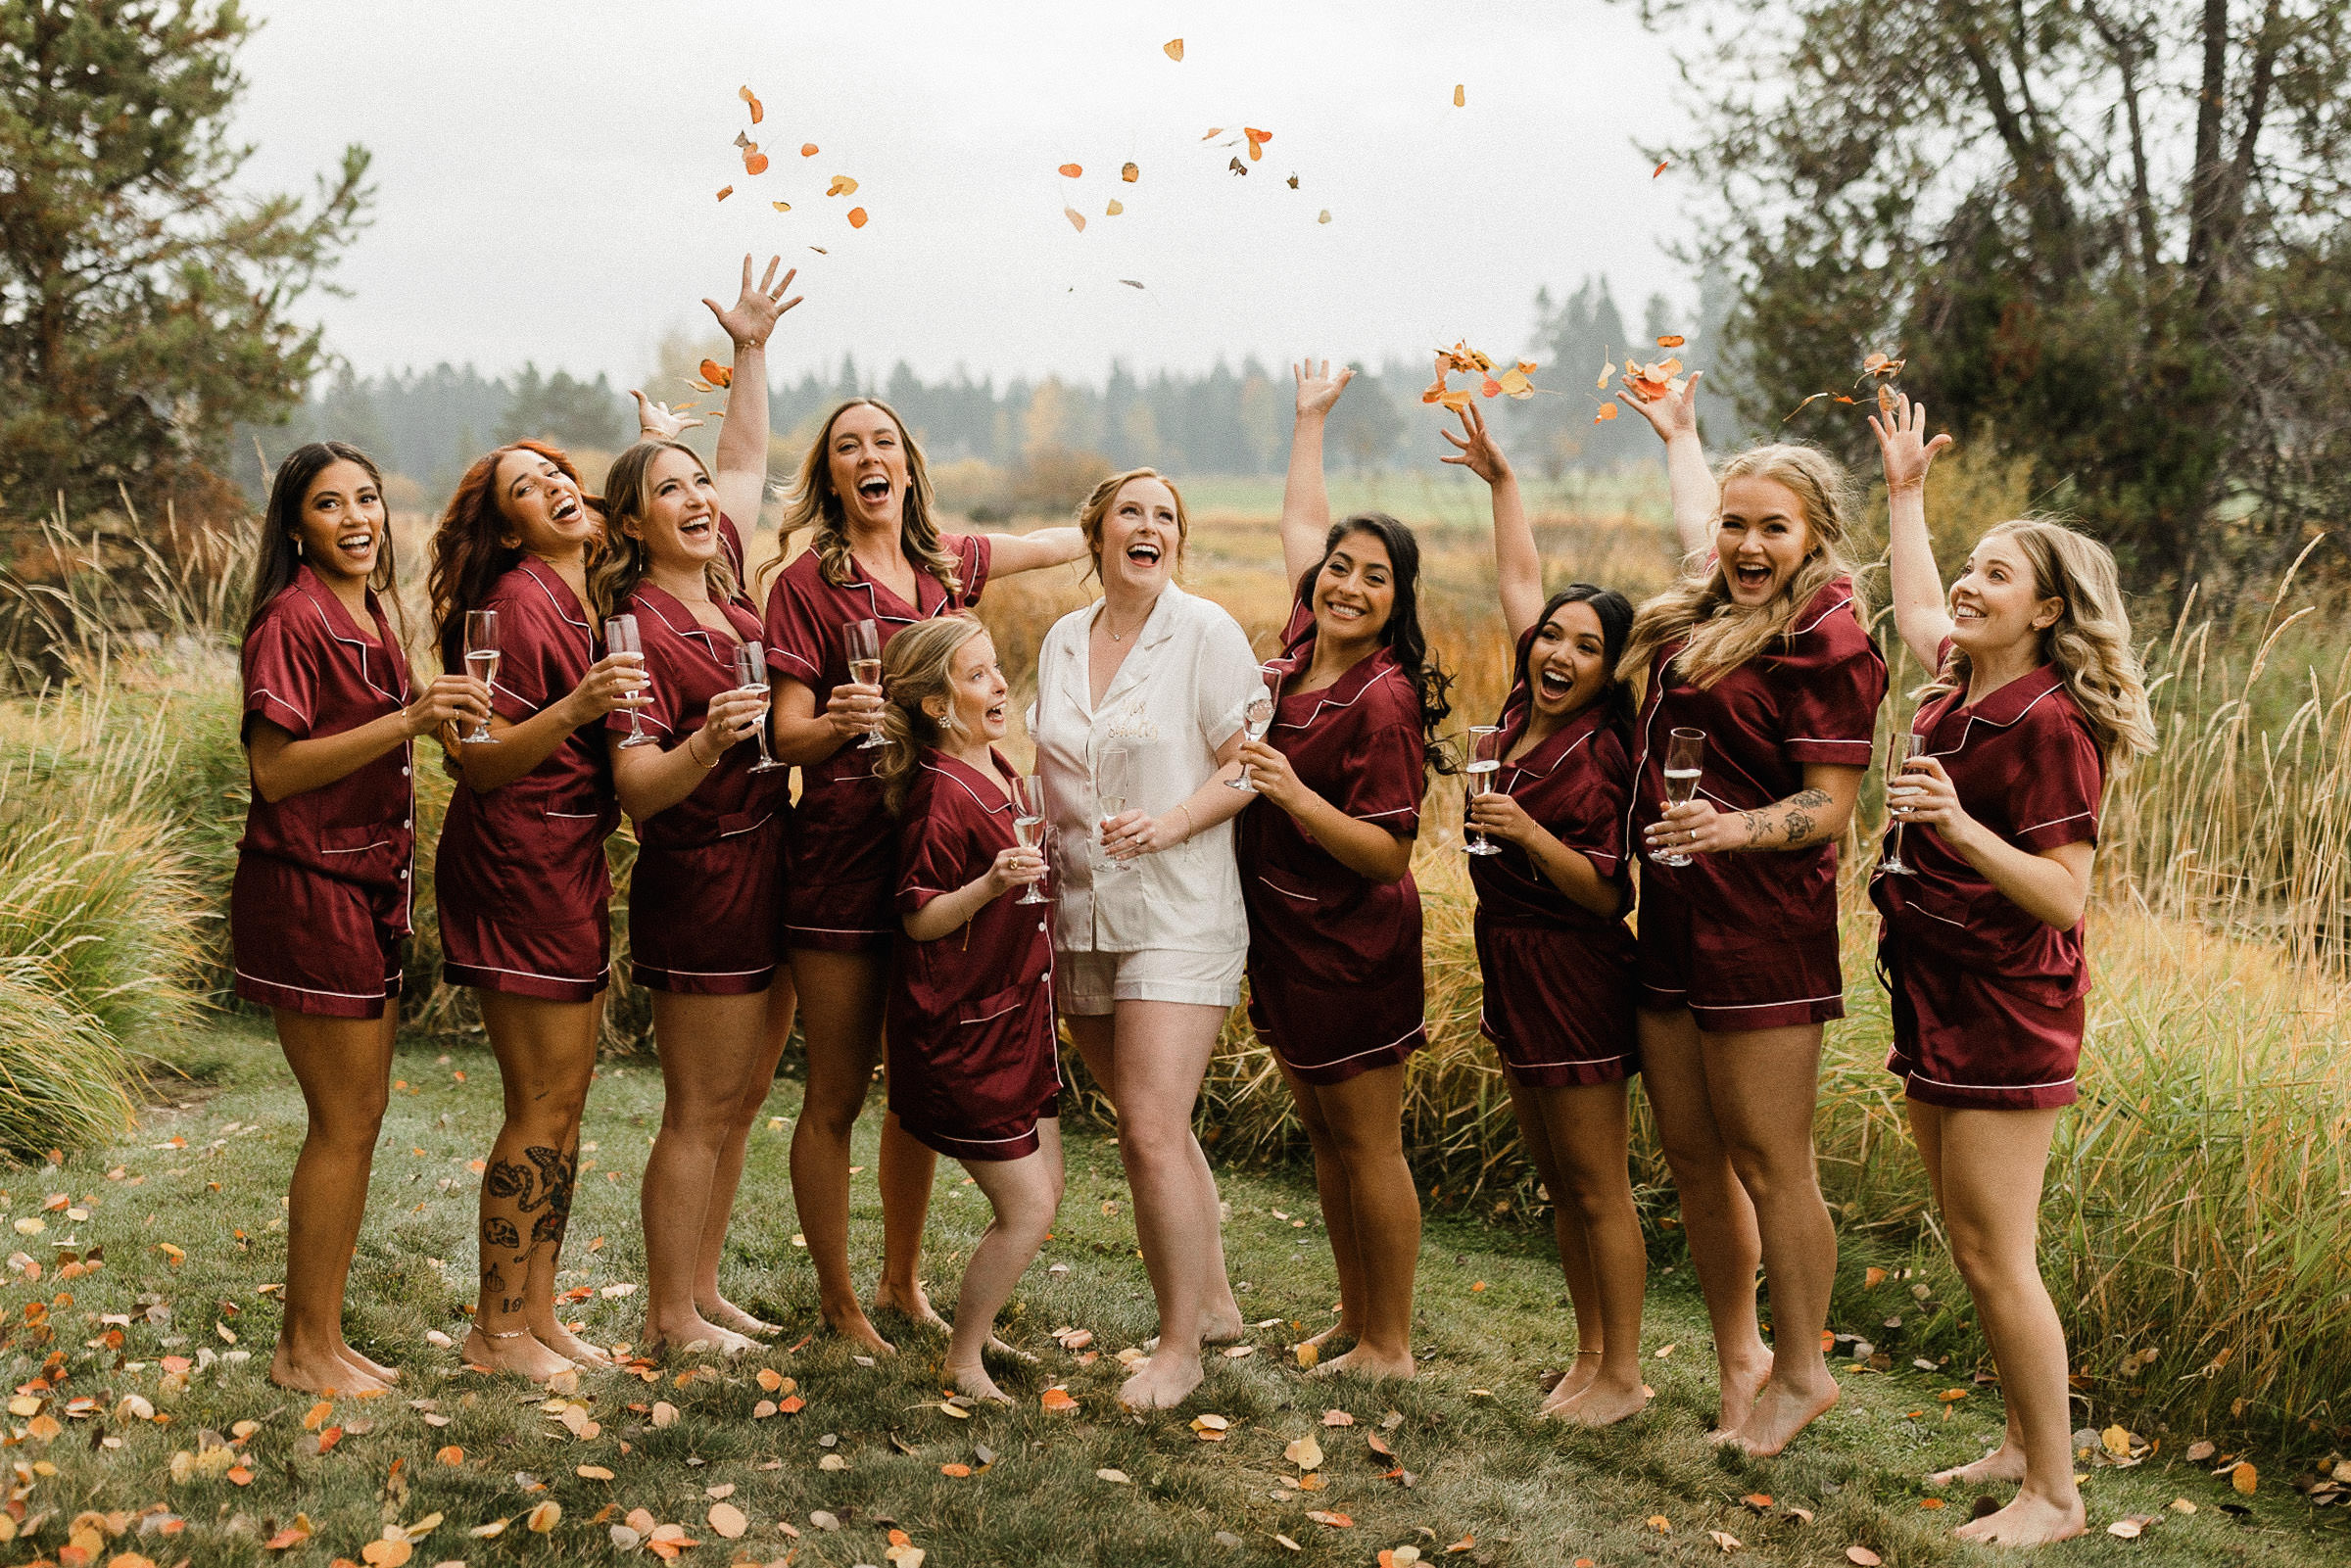 Bride and bridesmaids standing on a lawn, holding champagne glasses, and throwing fall leaves into the air